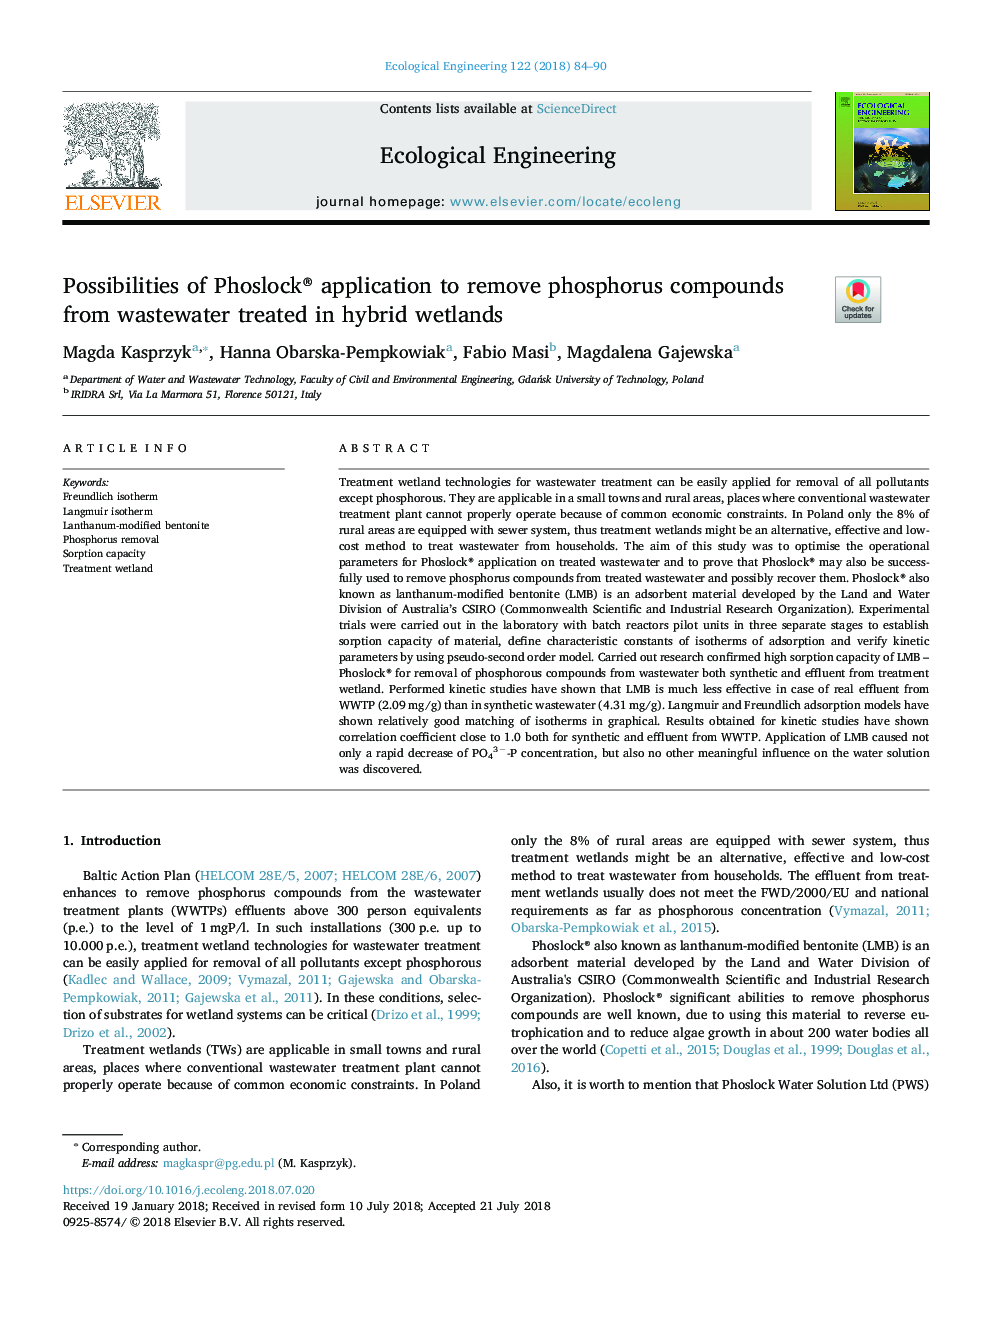 Possibilities of Phoslock® application to remove phosphorus compounds from wastewater treated in hybrid wetlands